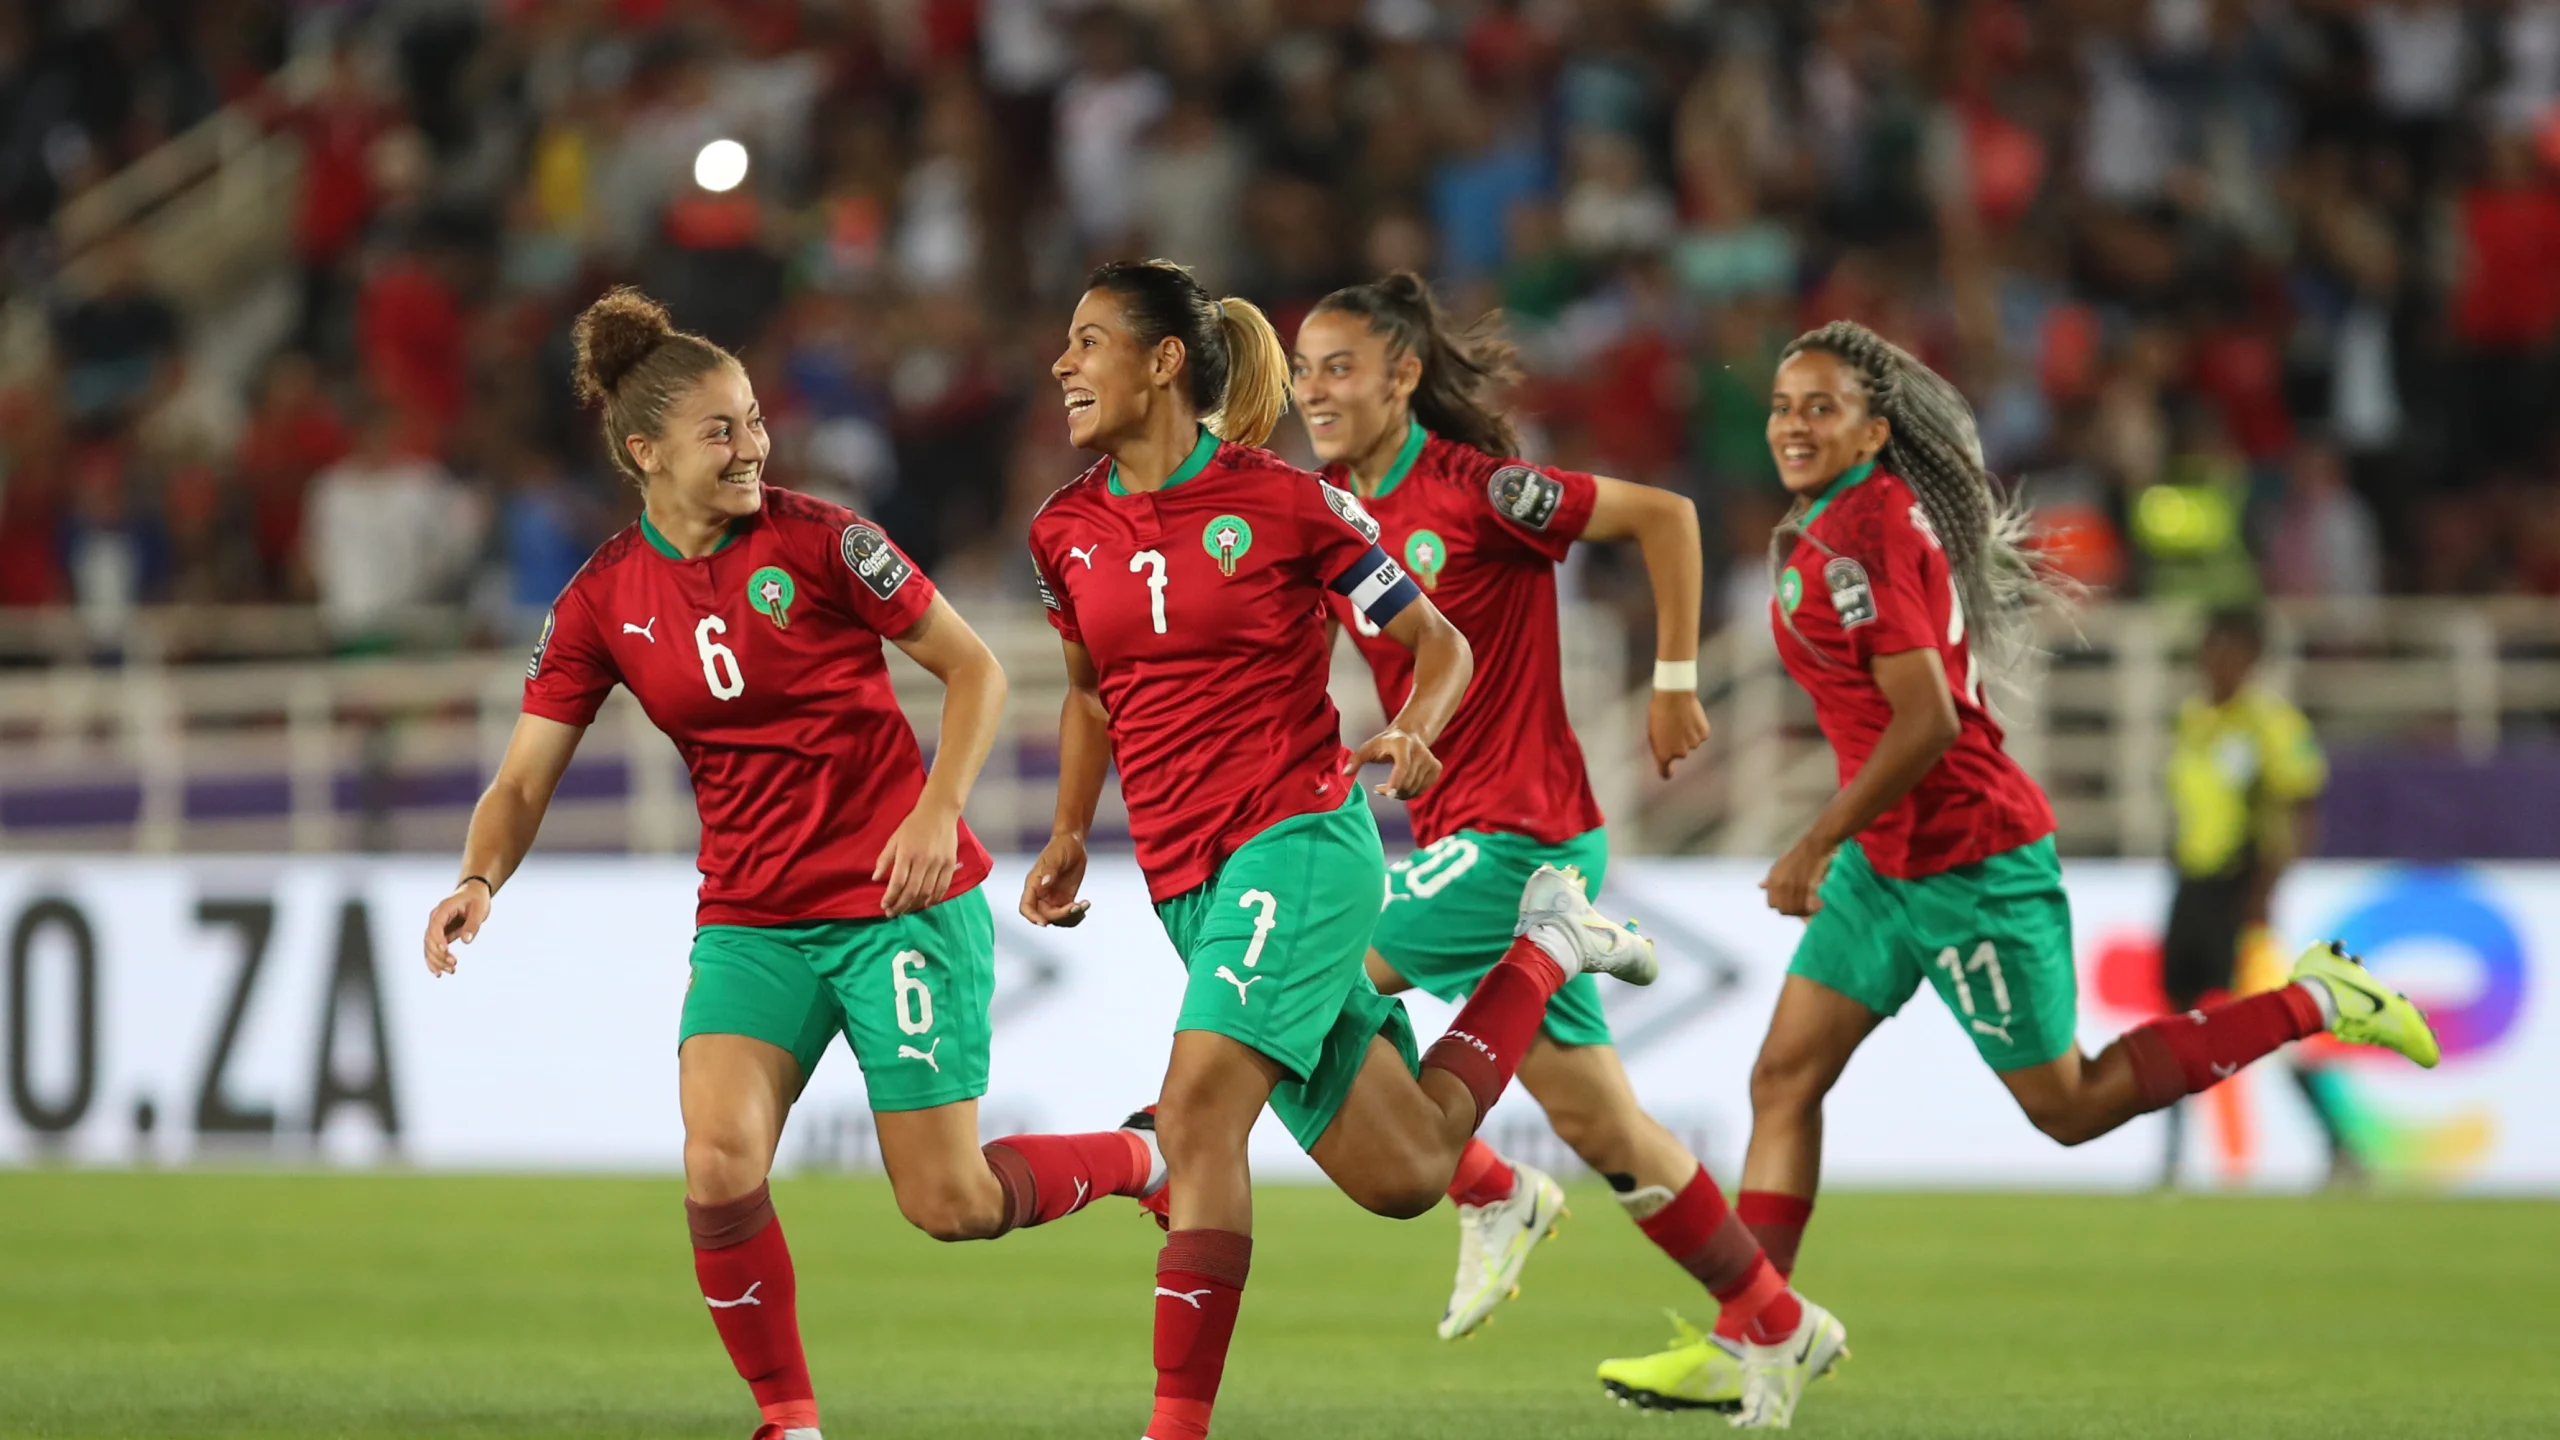 Morocco's captain Ghizlane Chebbak celebrates with her teammates after scoring a free-kick